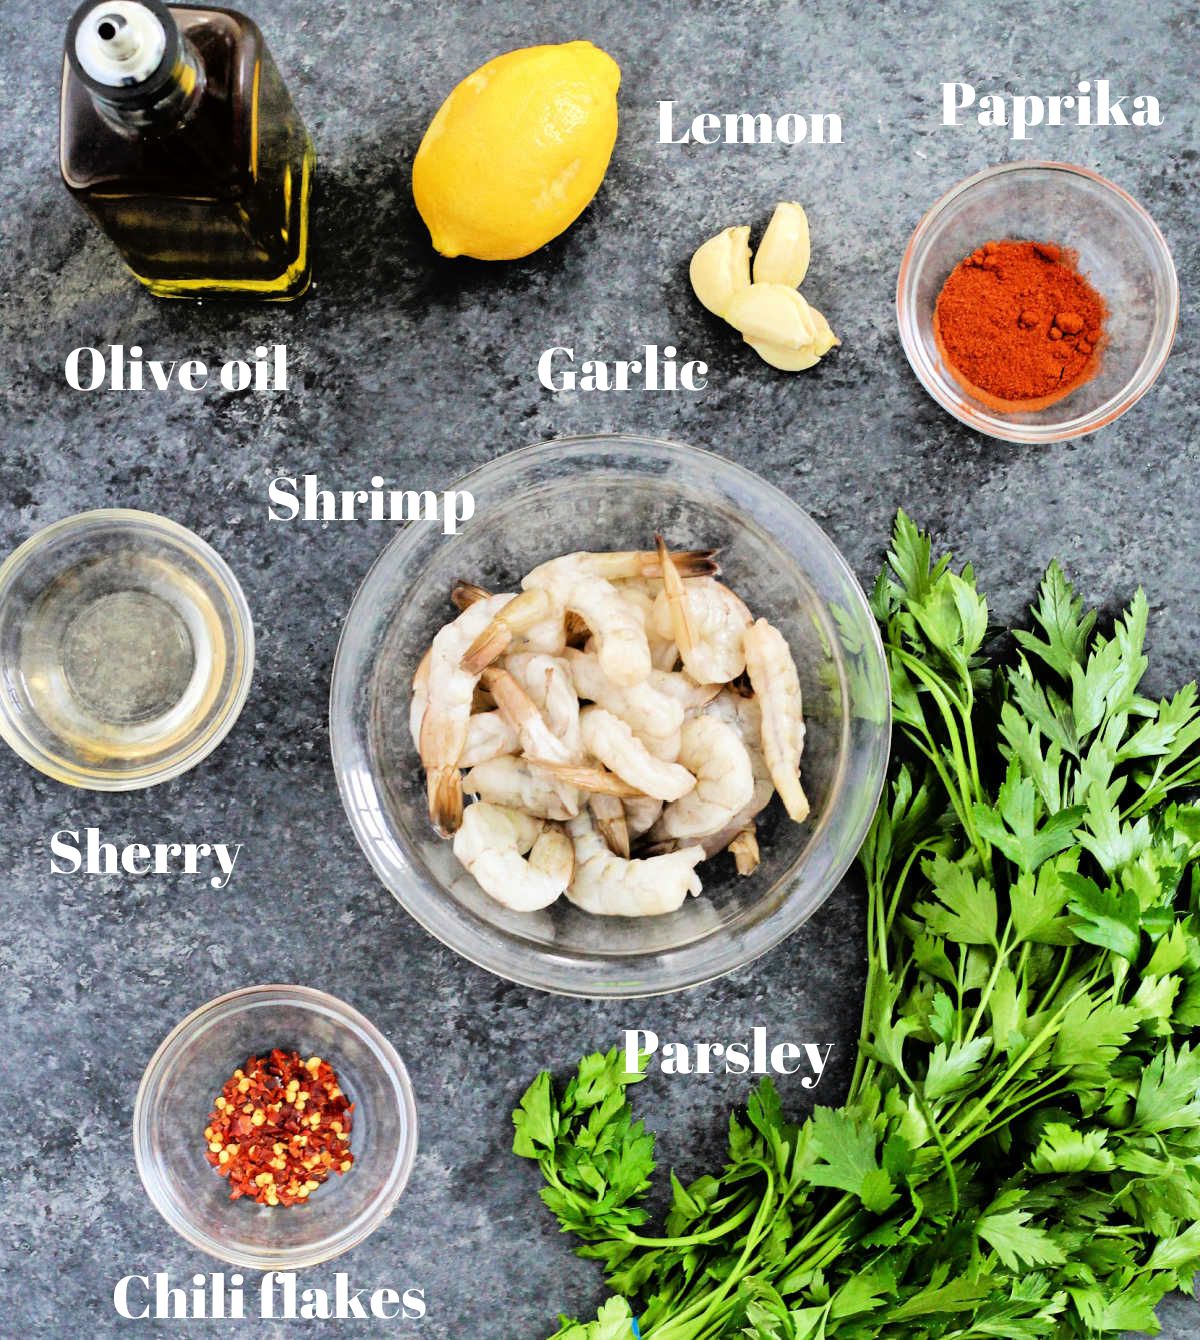 Ingredients for Spanish Garlic Shrimp on a gray board.